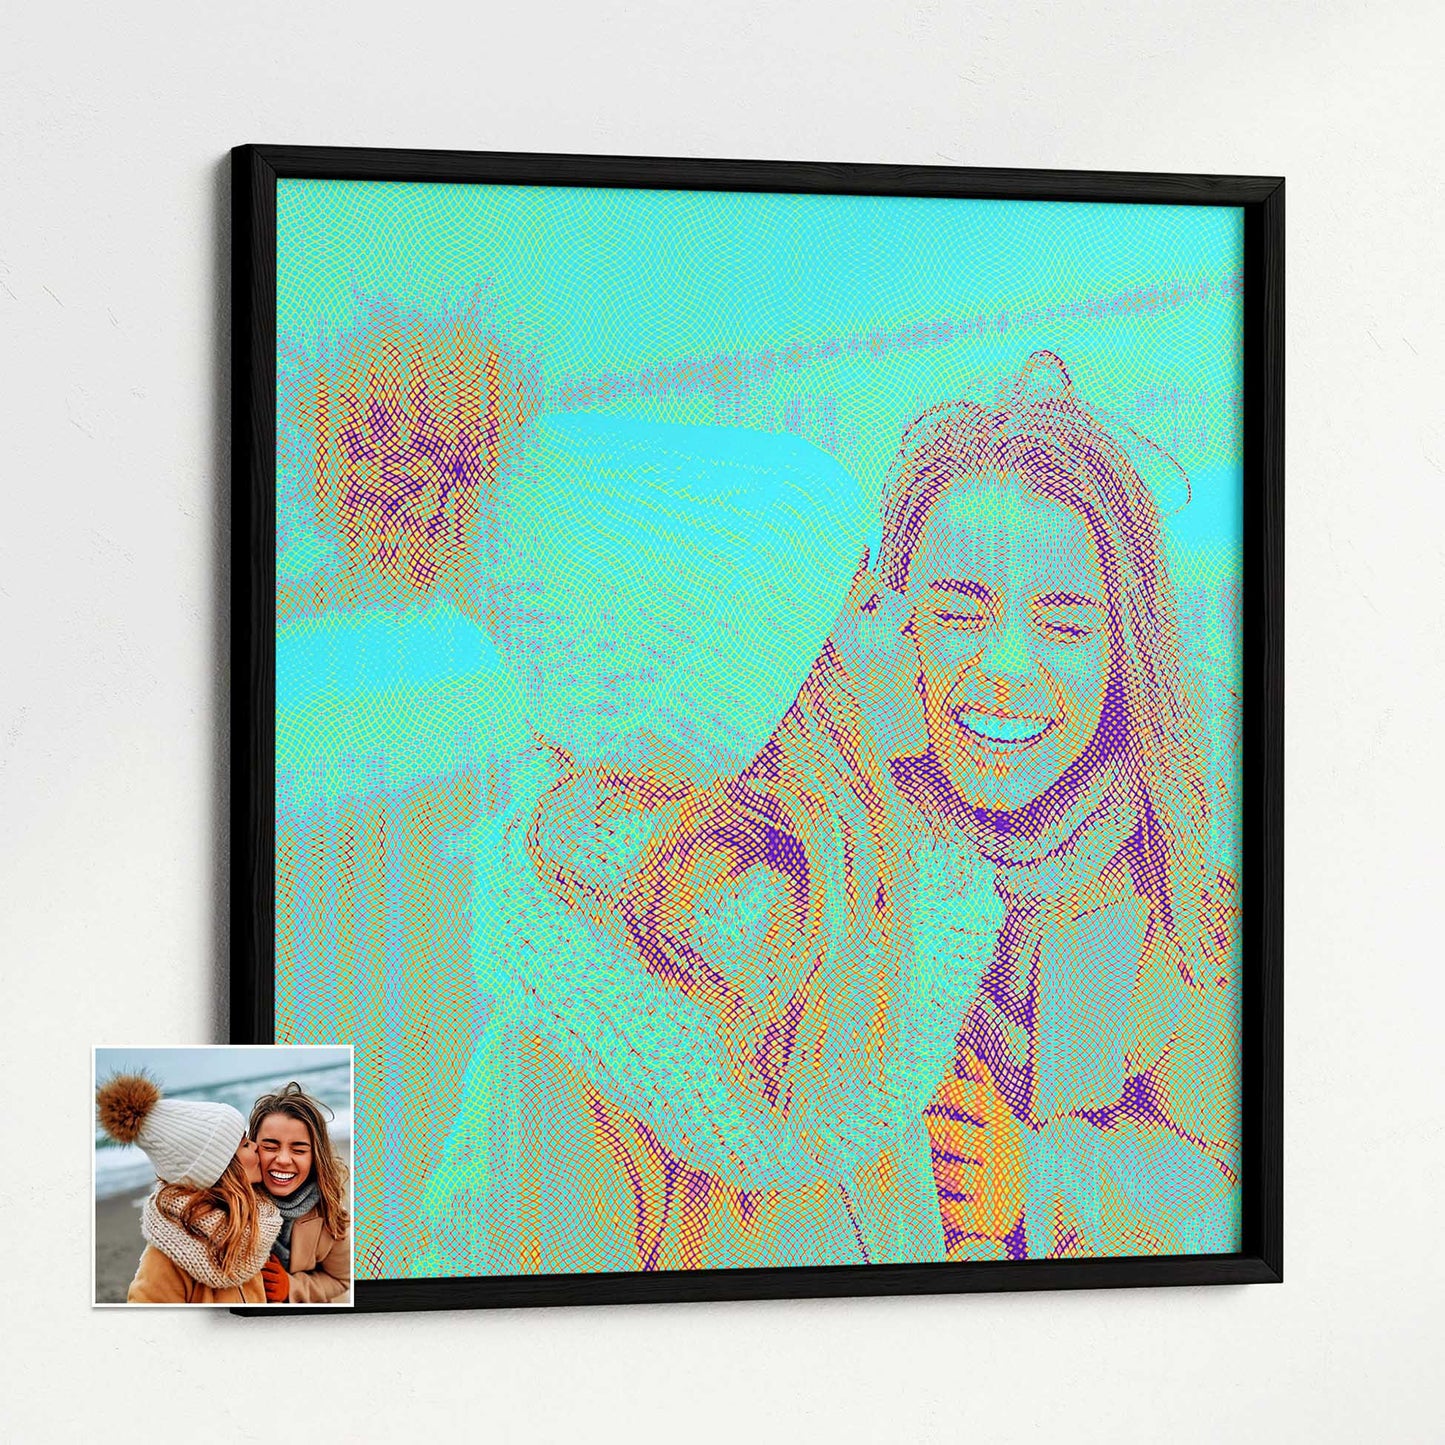 Infuse your space with the serene beauty of our Personalised Blue Engraved Framed Print. With its fresh and cool hues reminiscent of a sea breeze, it creates a chill atmosphere that soothes the soul. This unique artwork, made from your photo